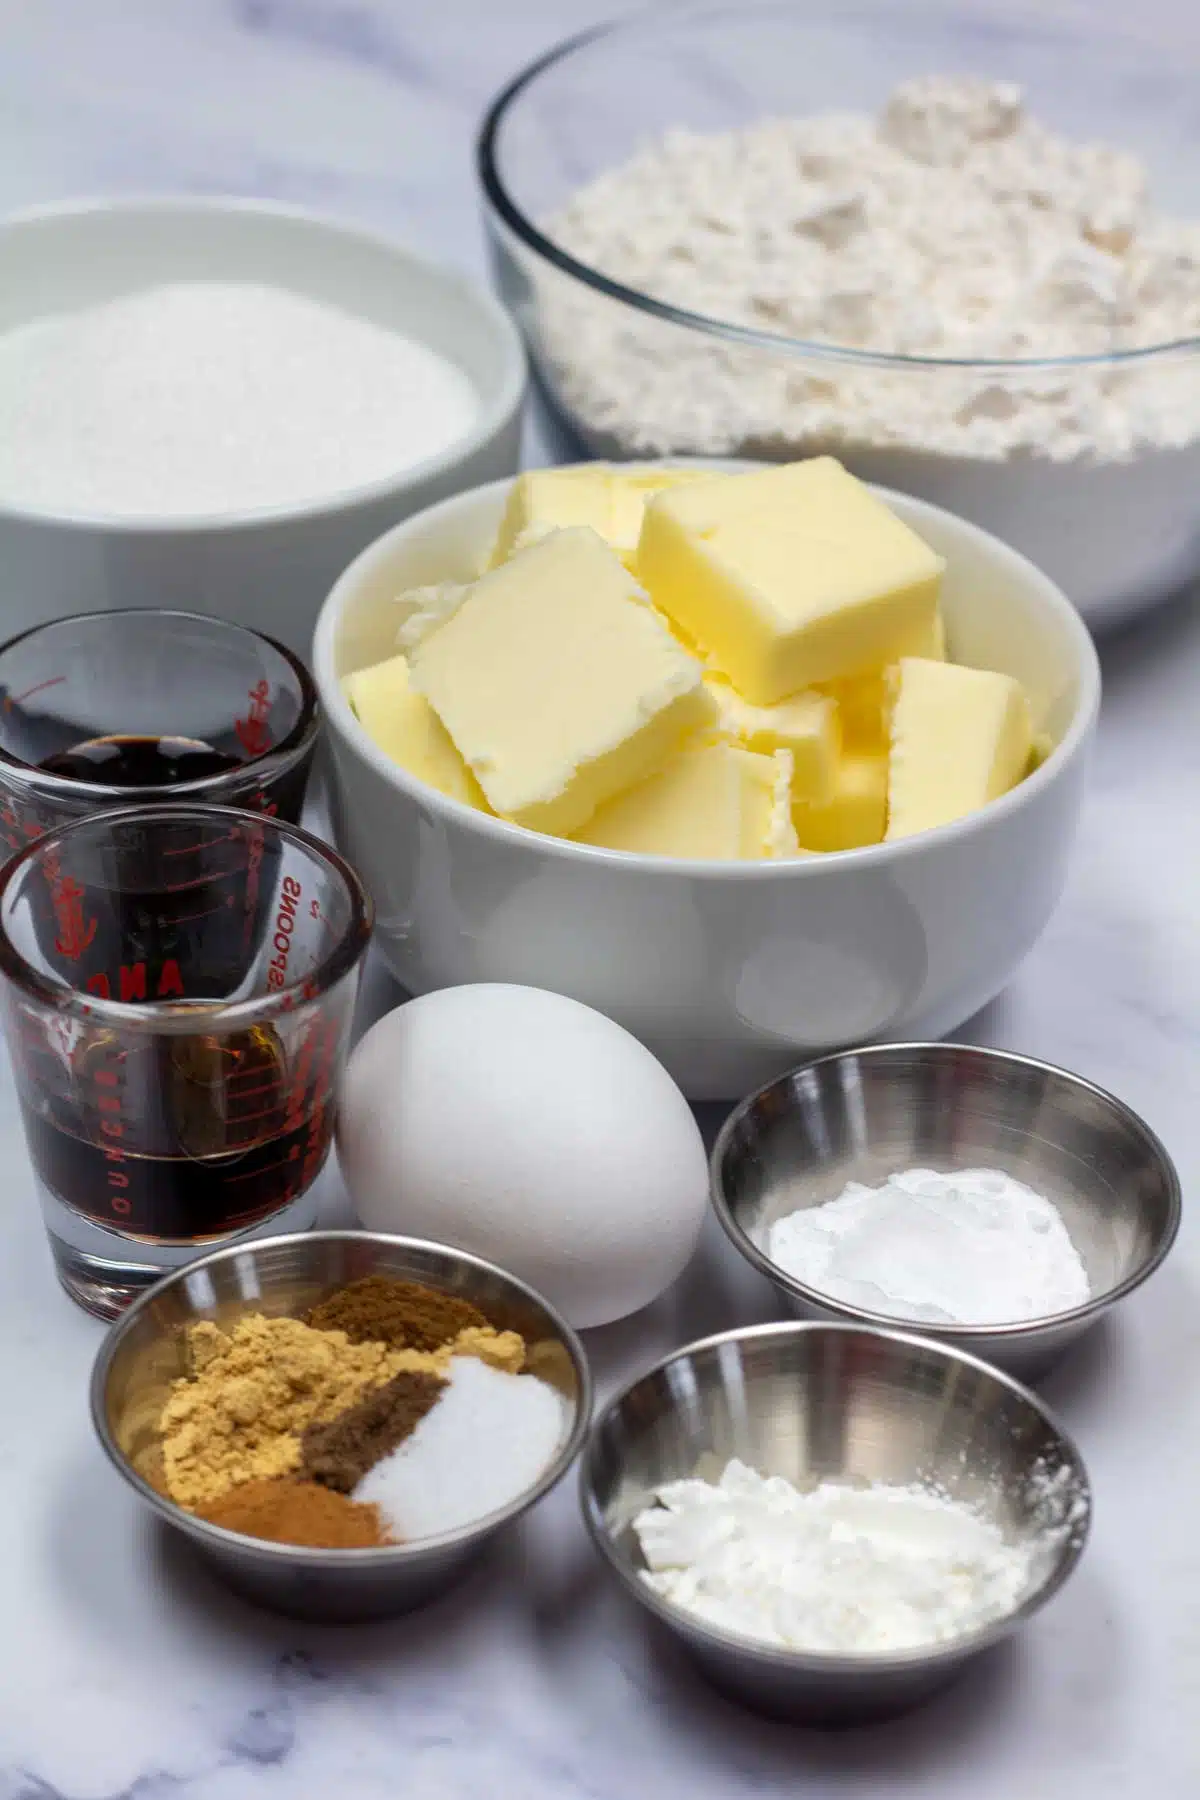 Tall image showing gingerdoodle cookie ingredients.